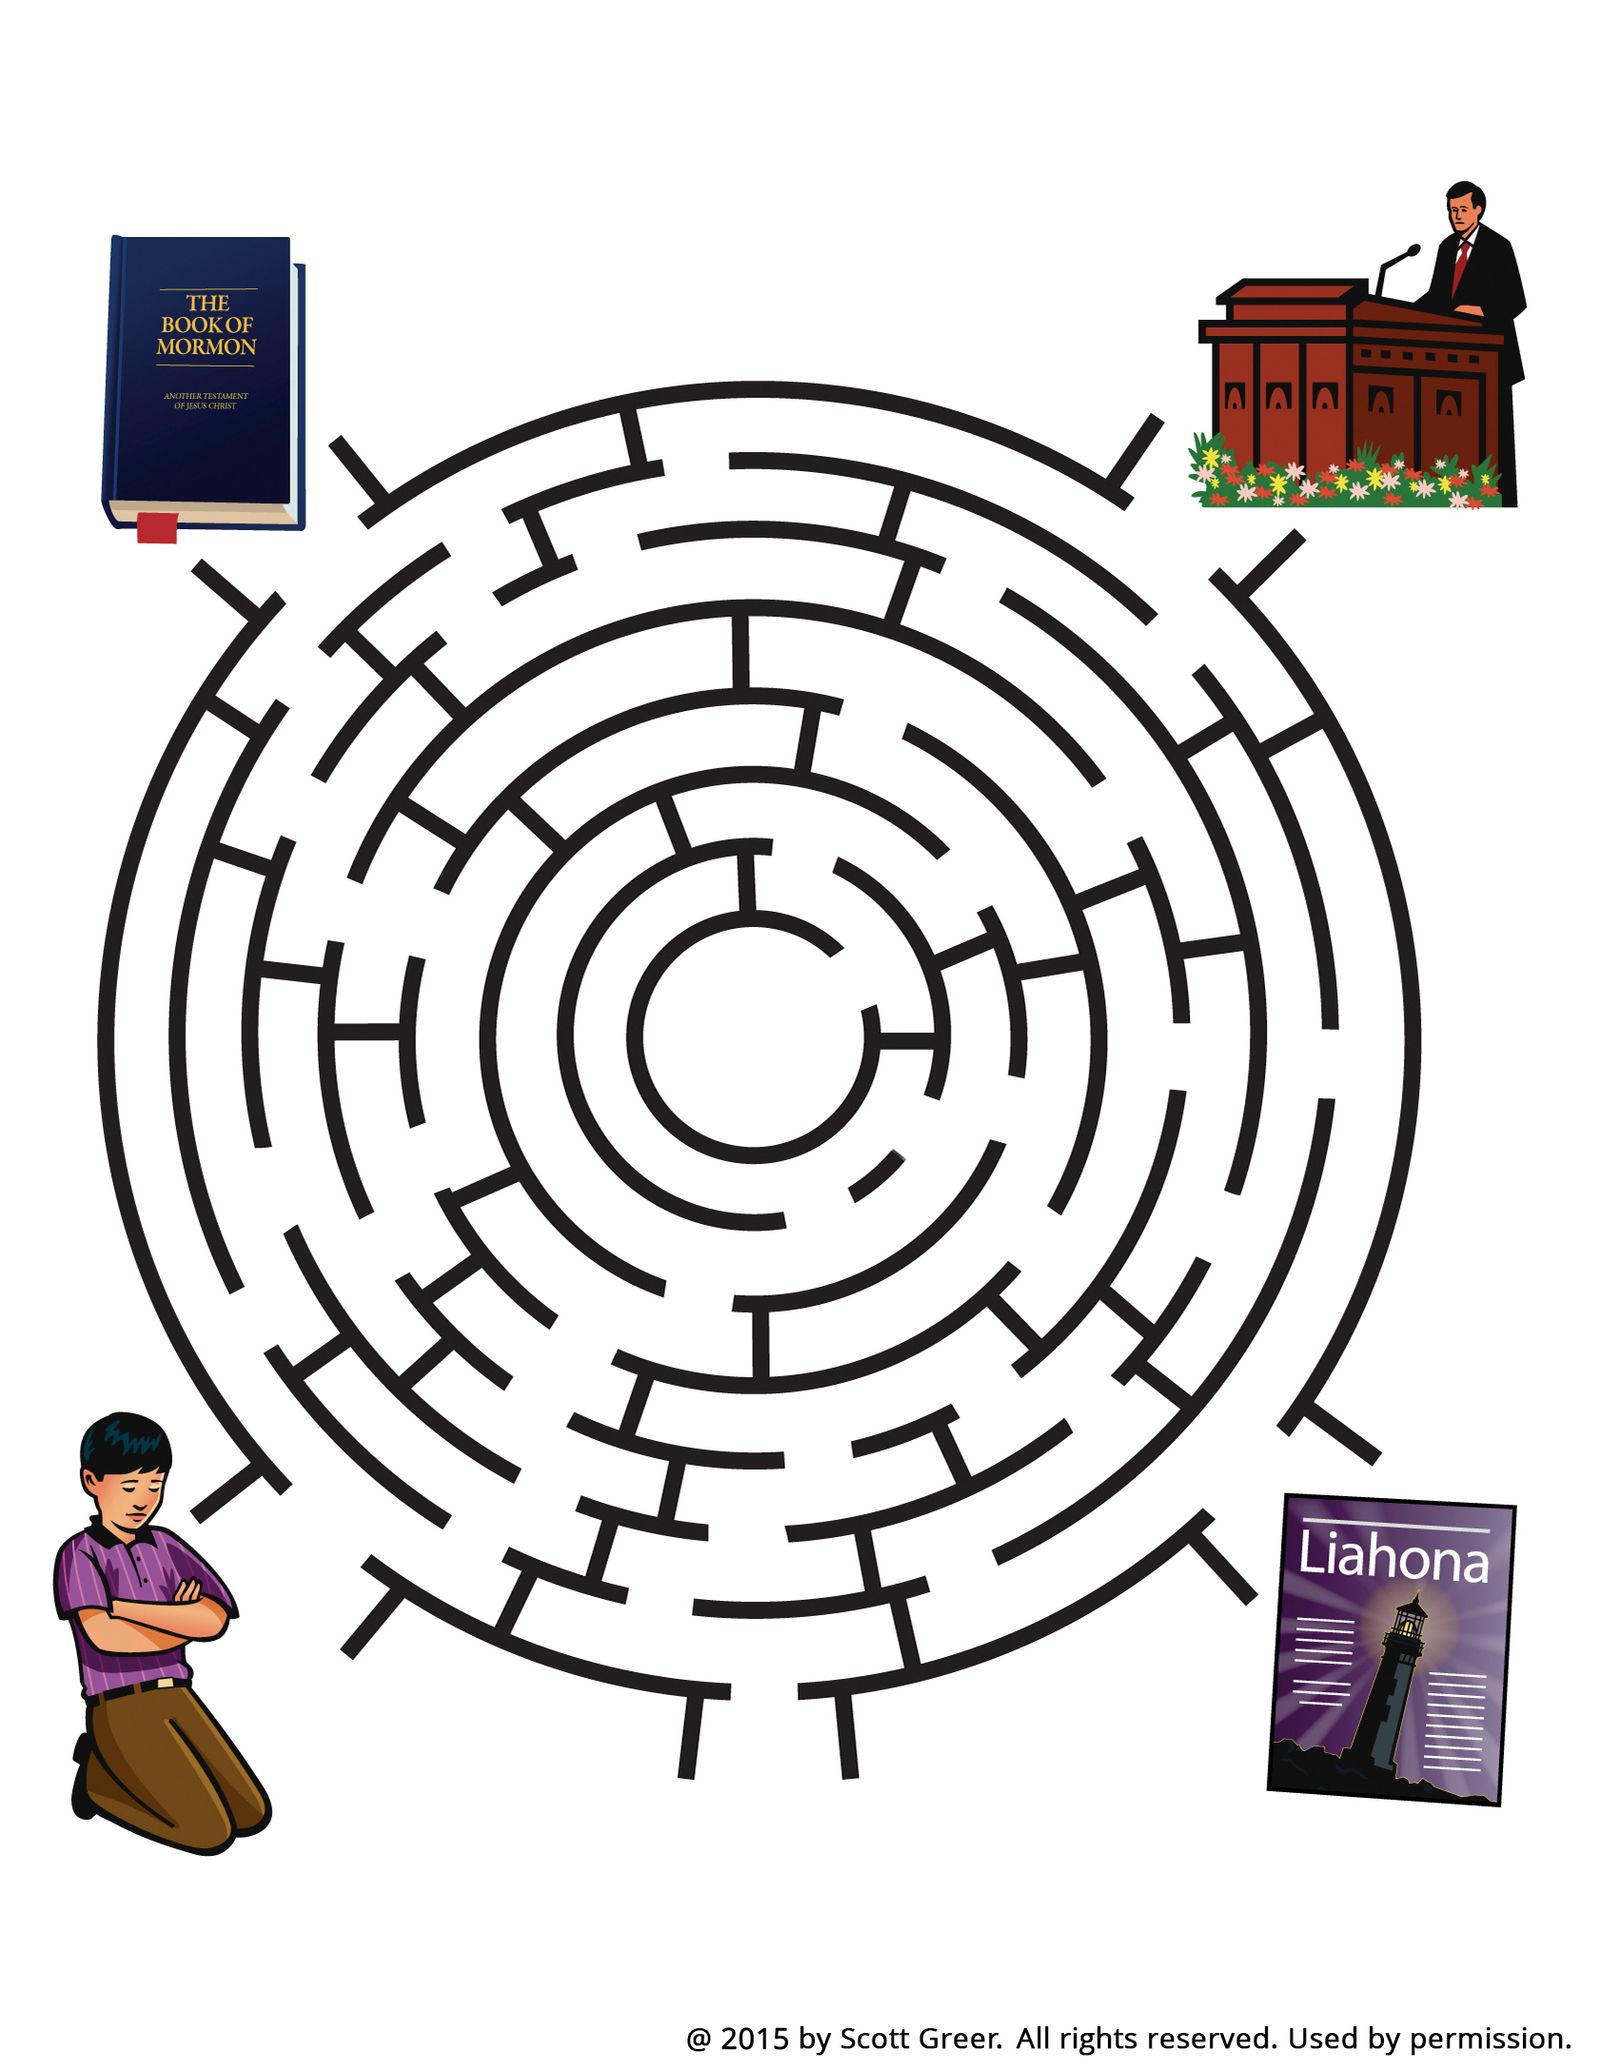 A maze with four entrances or exits with different illustrations.